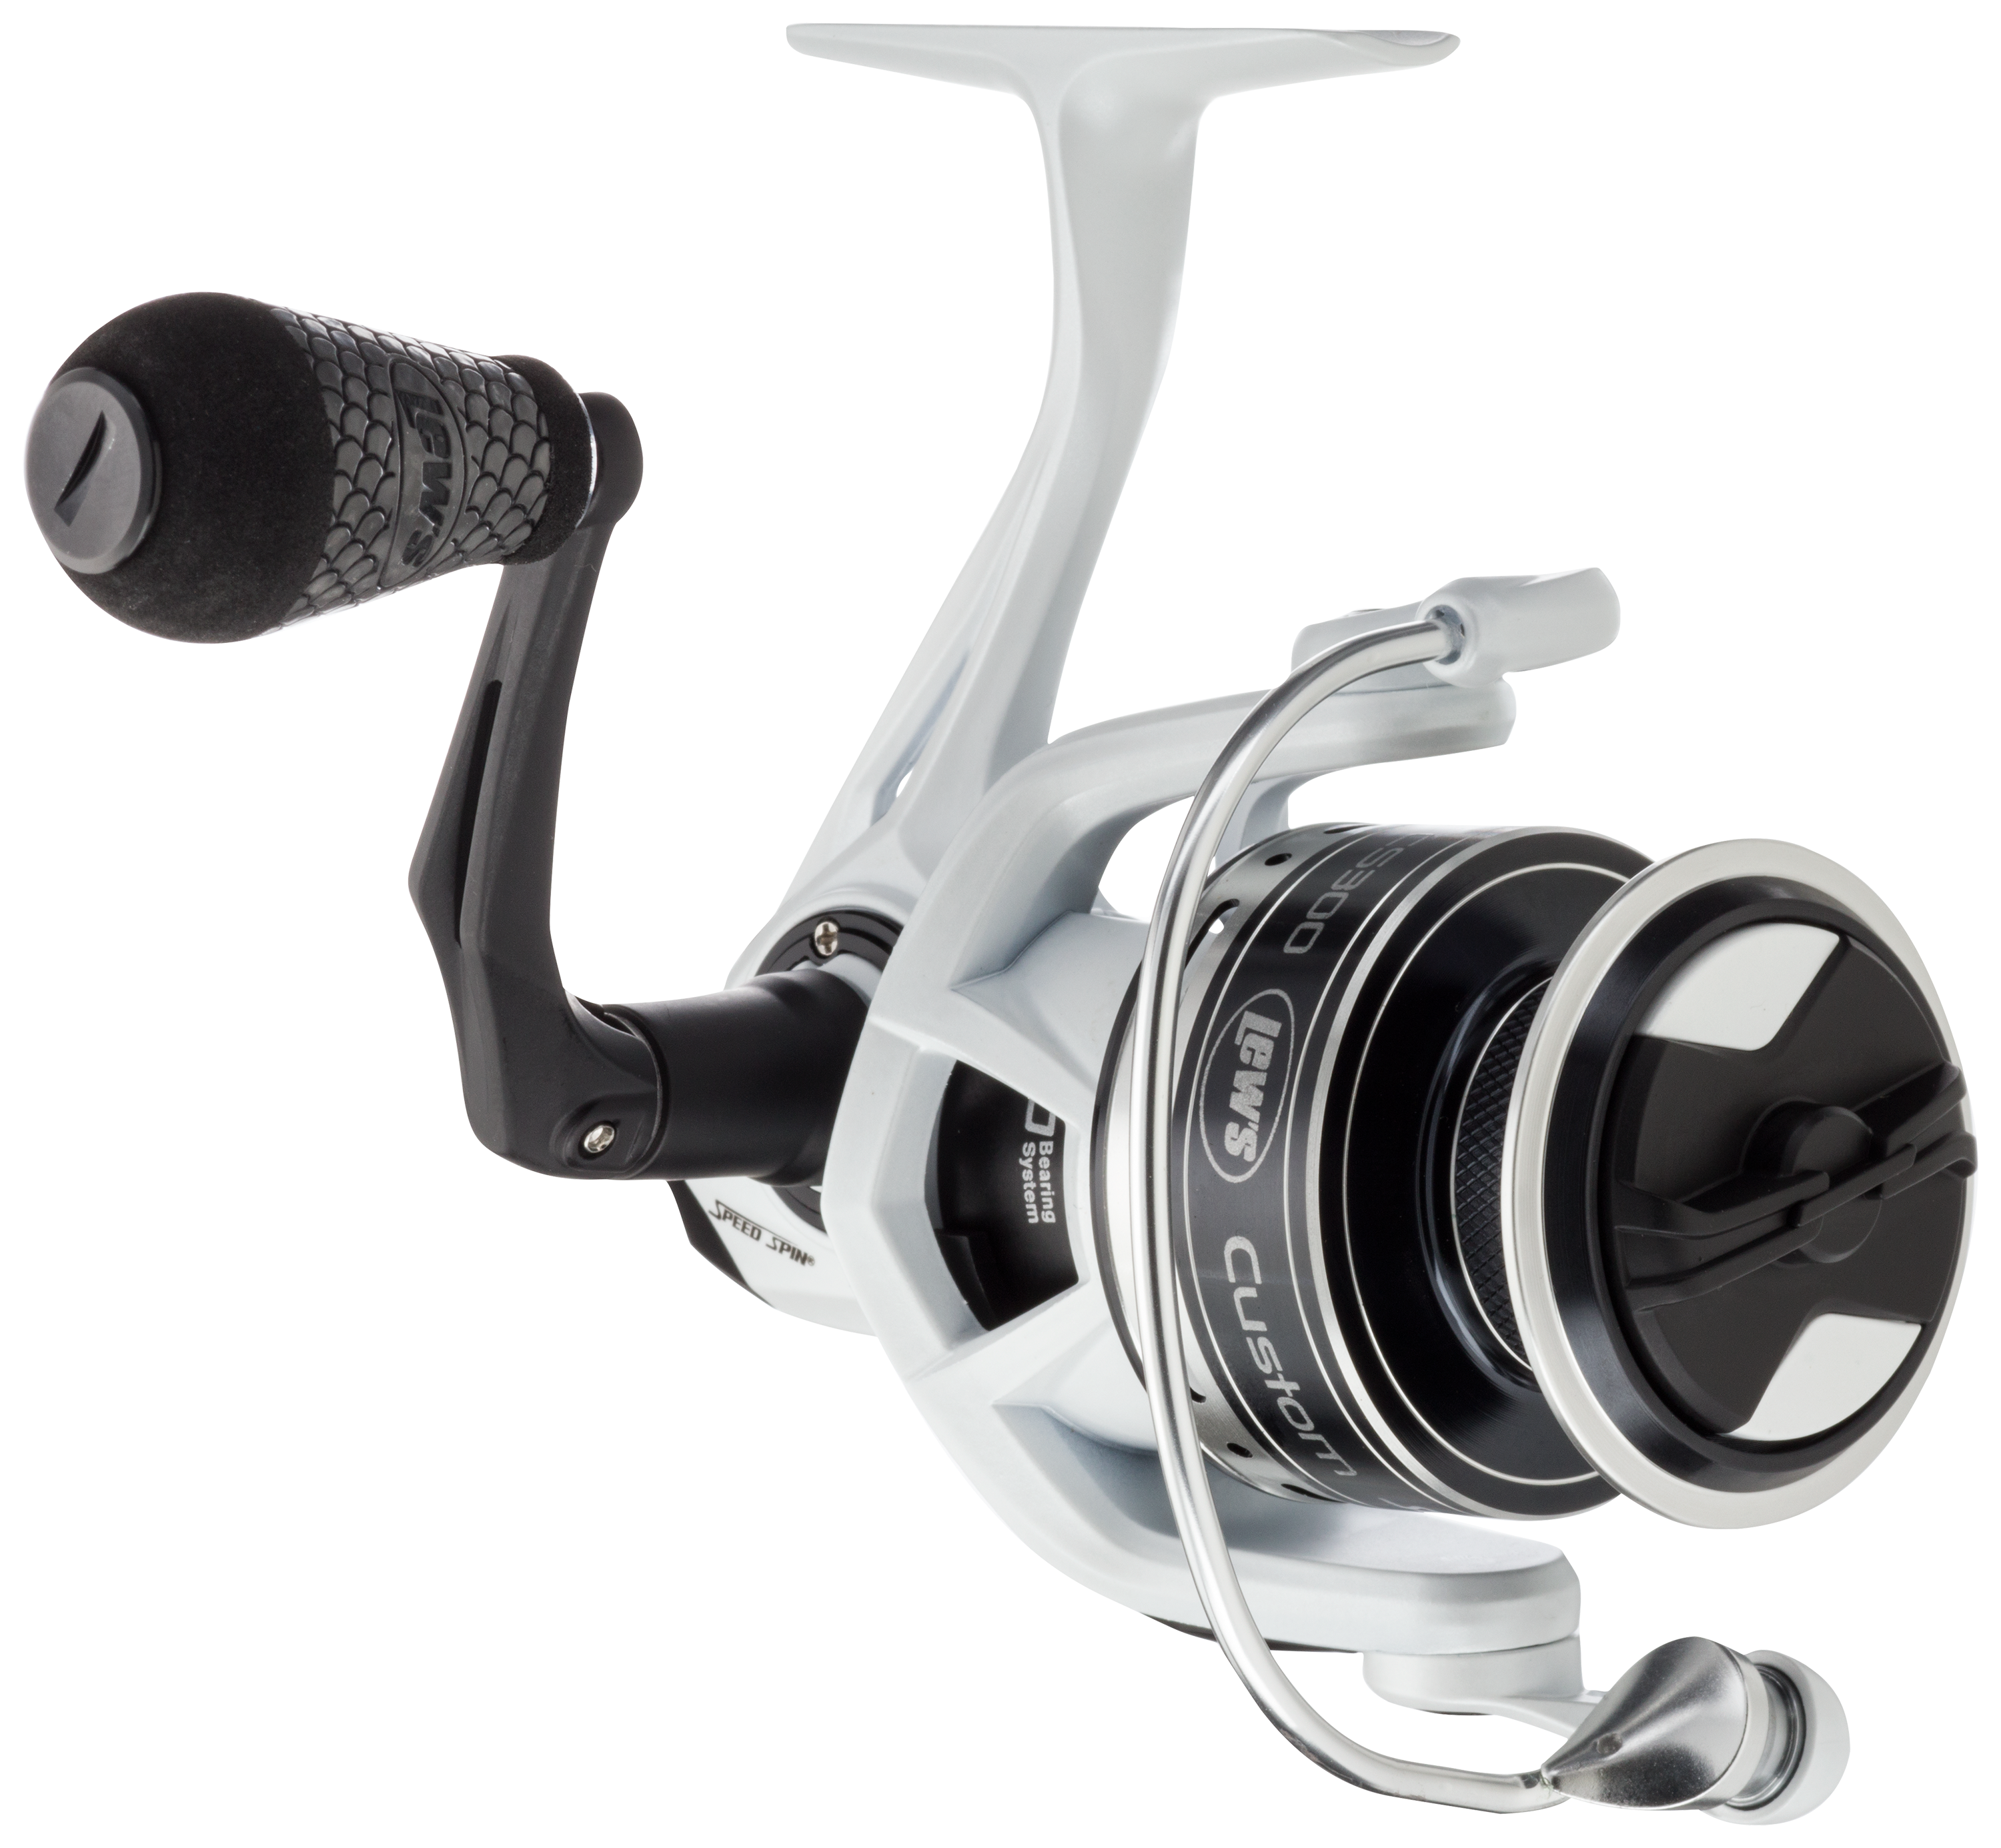 LEW'S LASER 5G SPEED SPIN LSGG200A SPINNING REEL NEW IN BOX